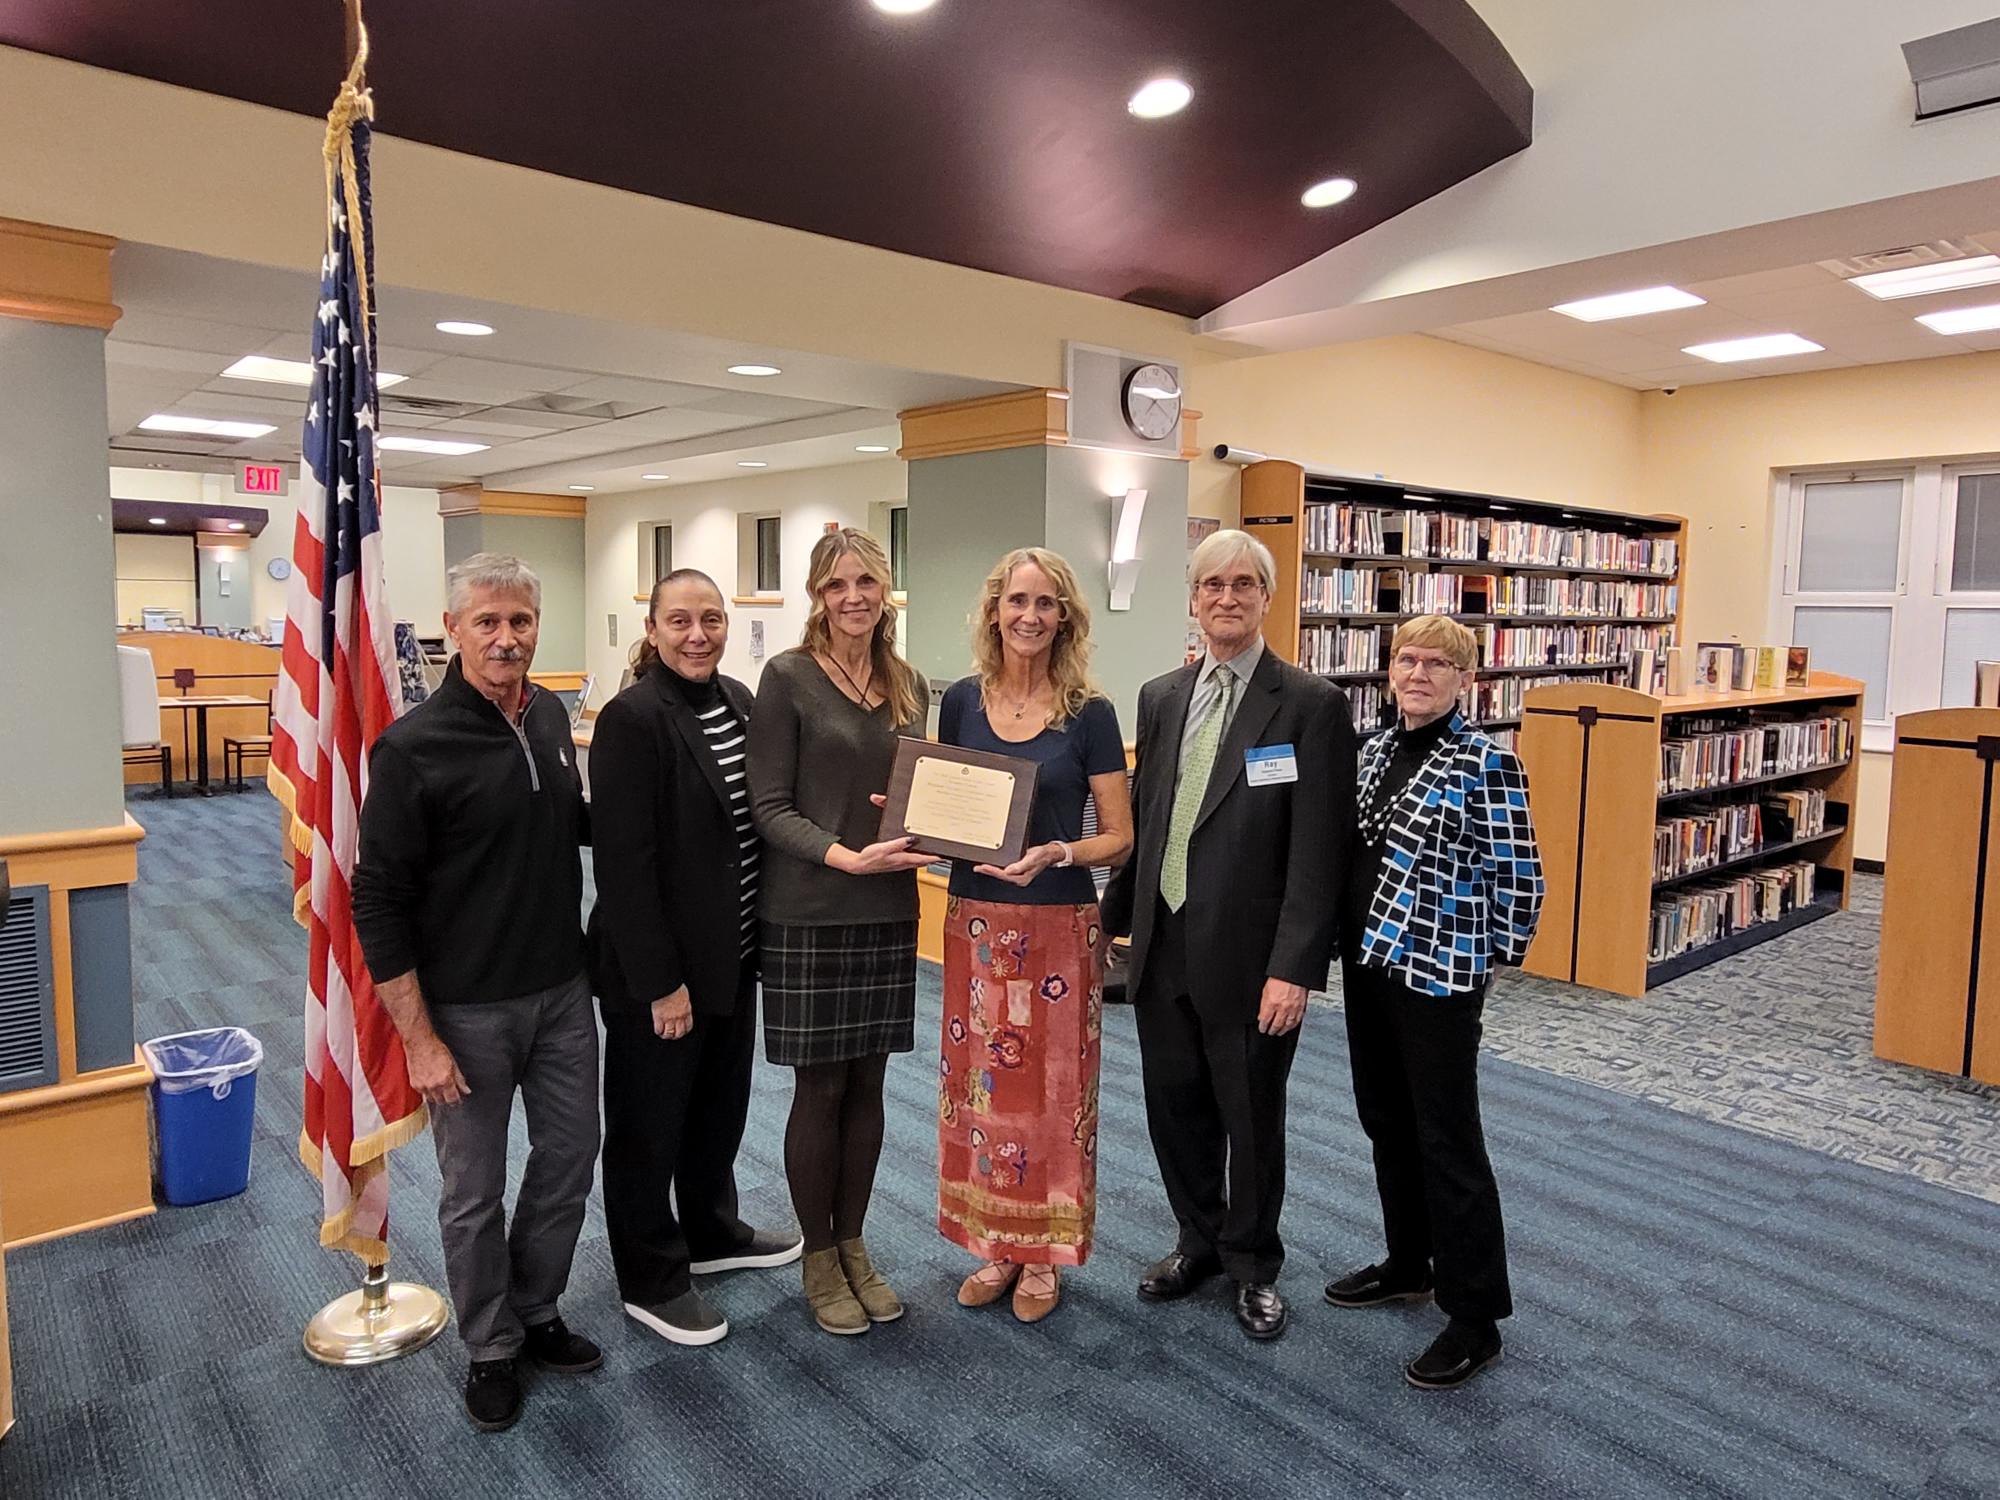 mendham-township-elementary-school-honored-for-school-leader-recognition-new-jersey-school